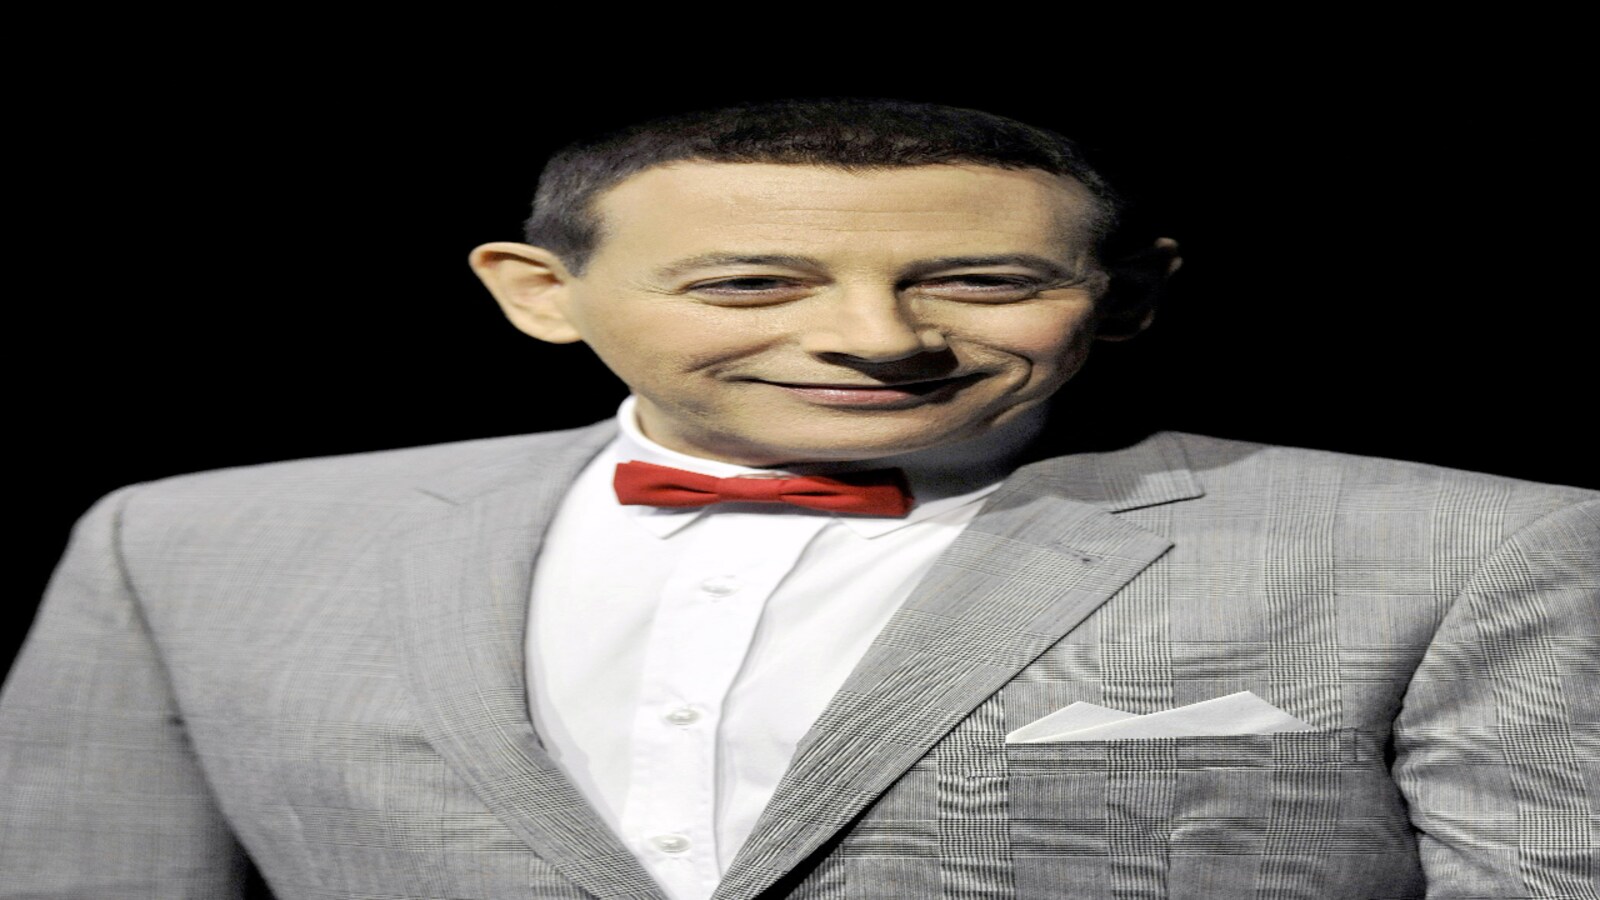 Paul Reubens (Pee-wee Herman to most) has passed away at the age of 70, News